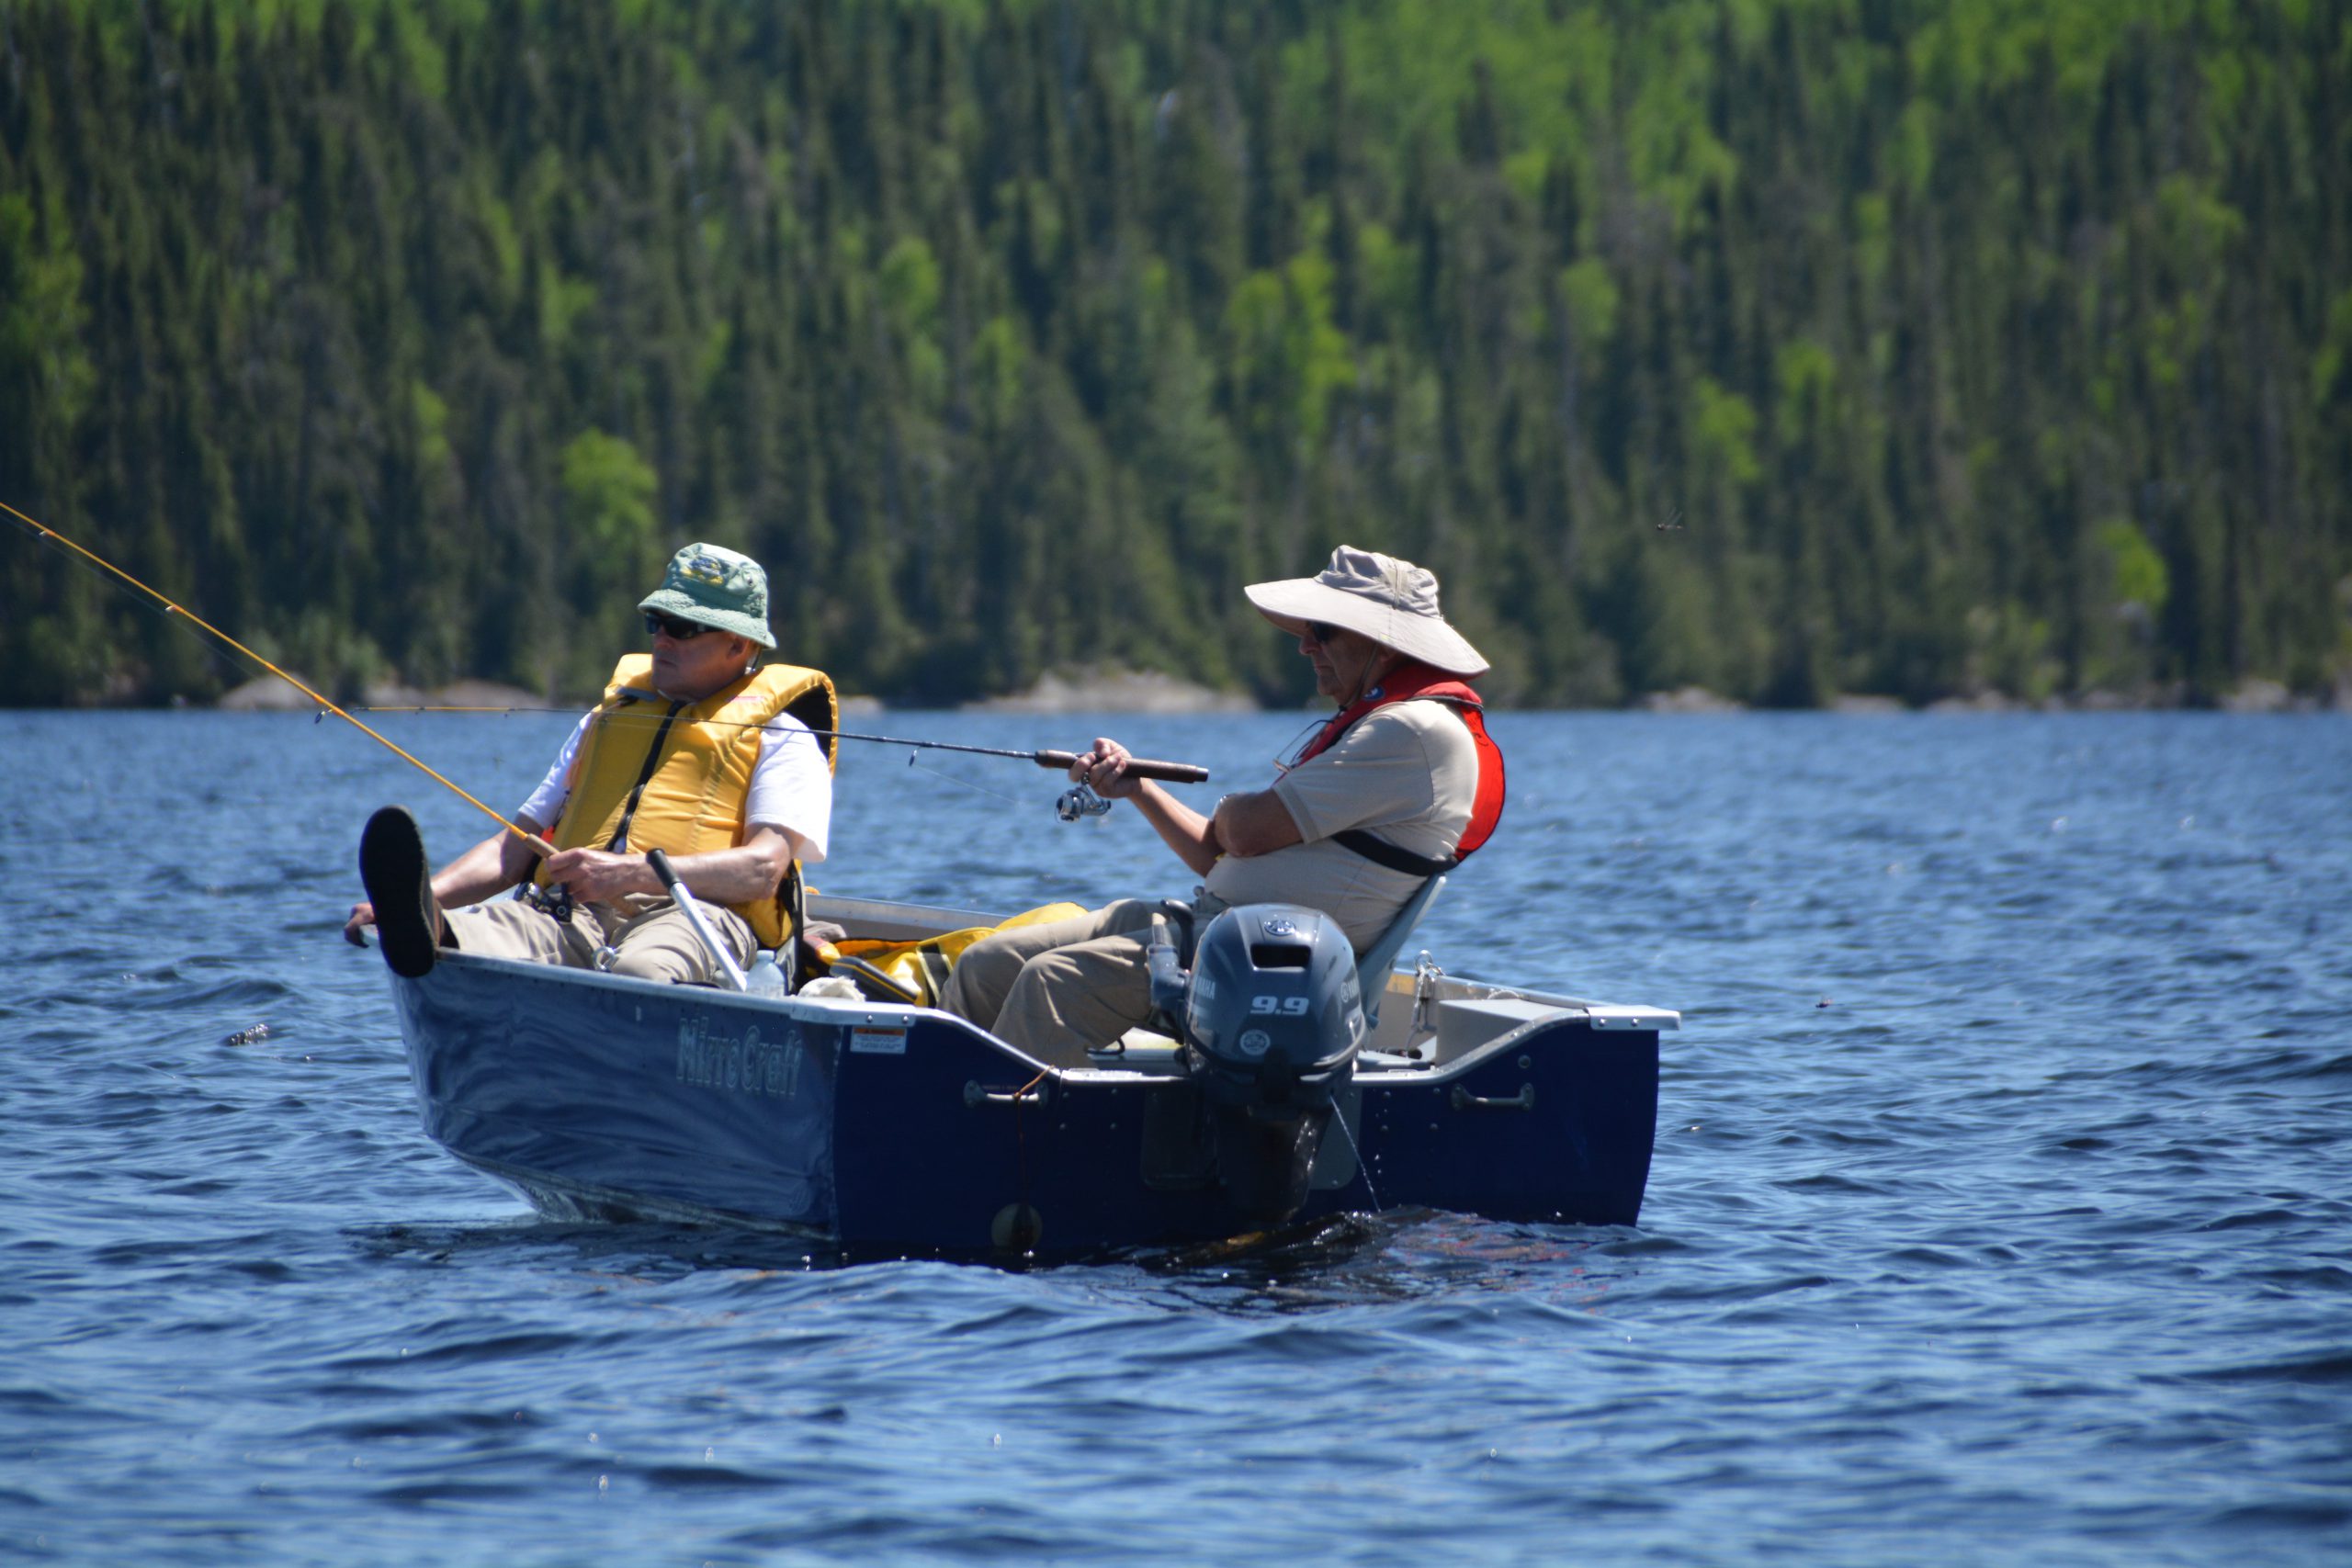 Two gentlemen out fishing in a motorboat on the lake.